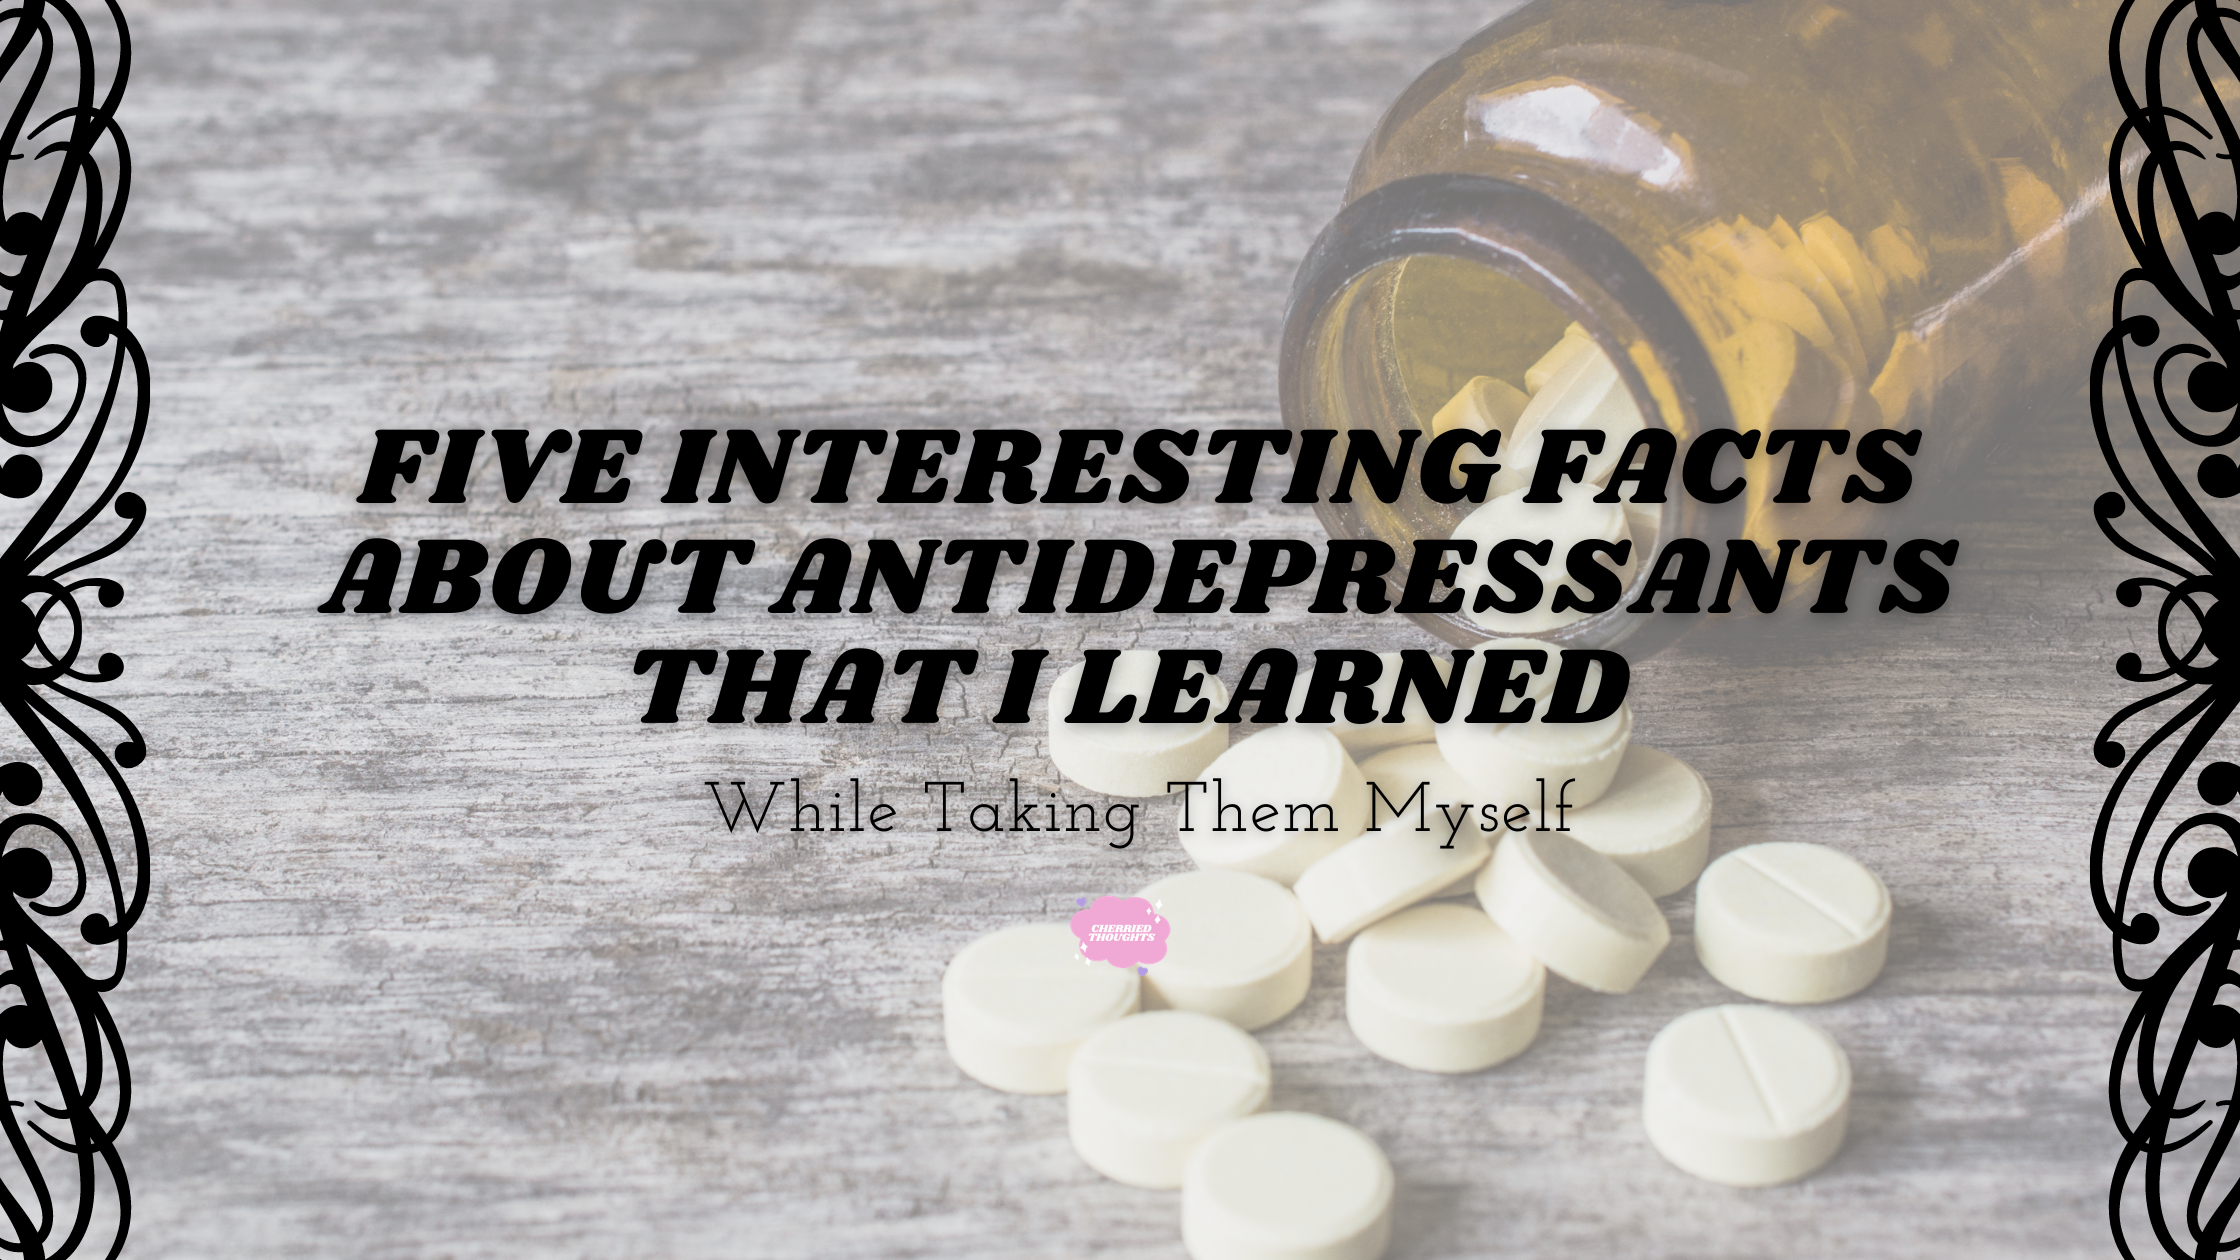 Five Interesting Facts About Antidepressants That I Learned While Taking Them